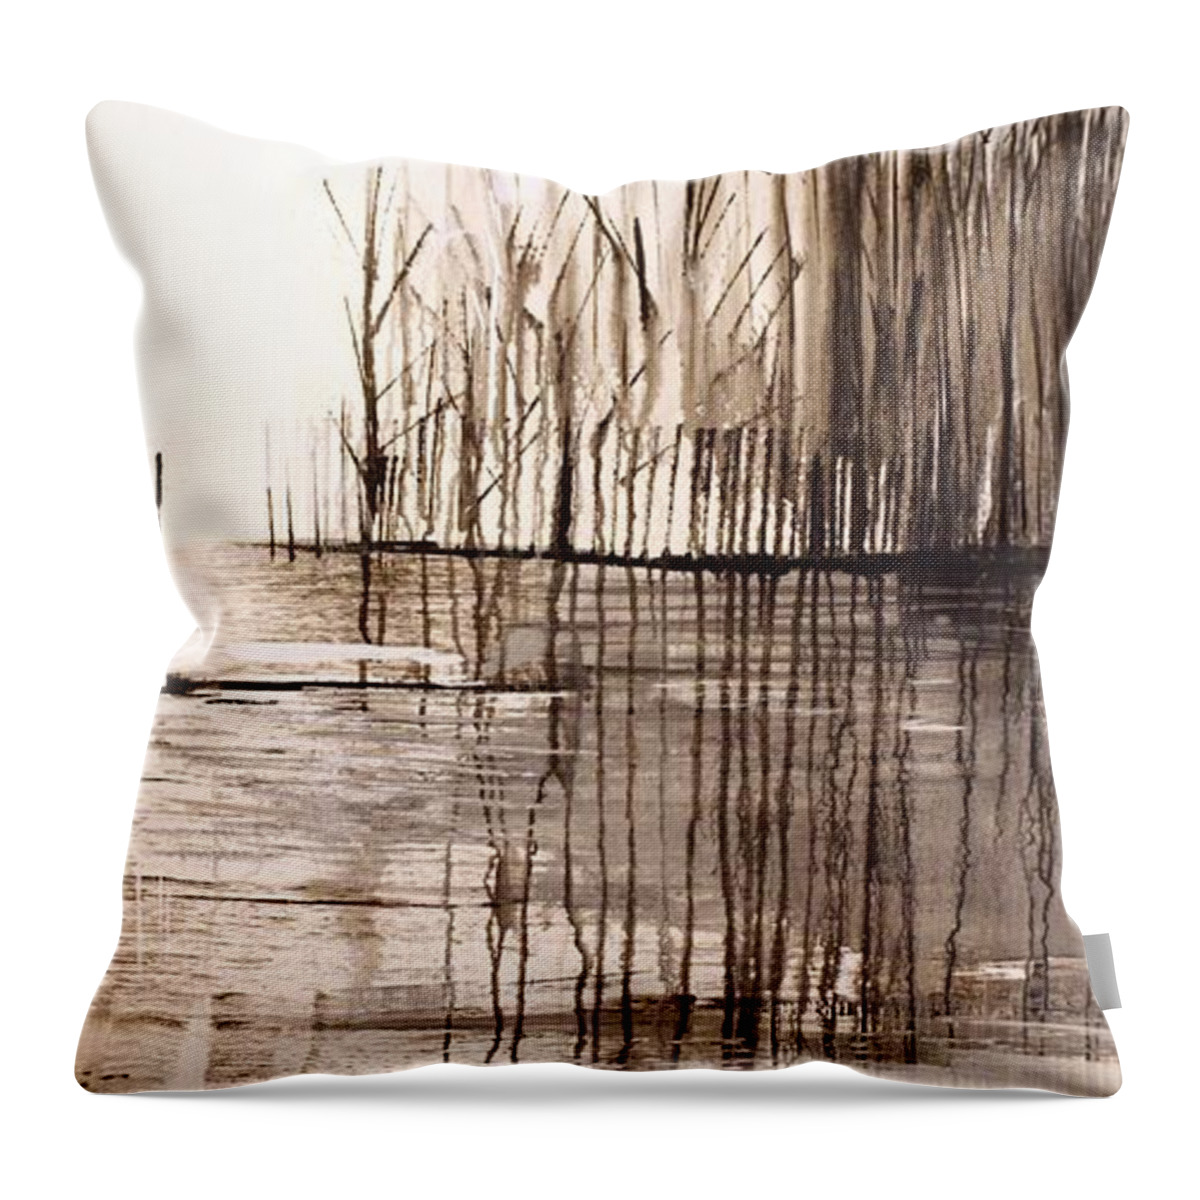 Art Throw Pillow featuring the painting Natural Abstract 1 by Jack Diamond